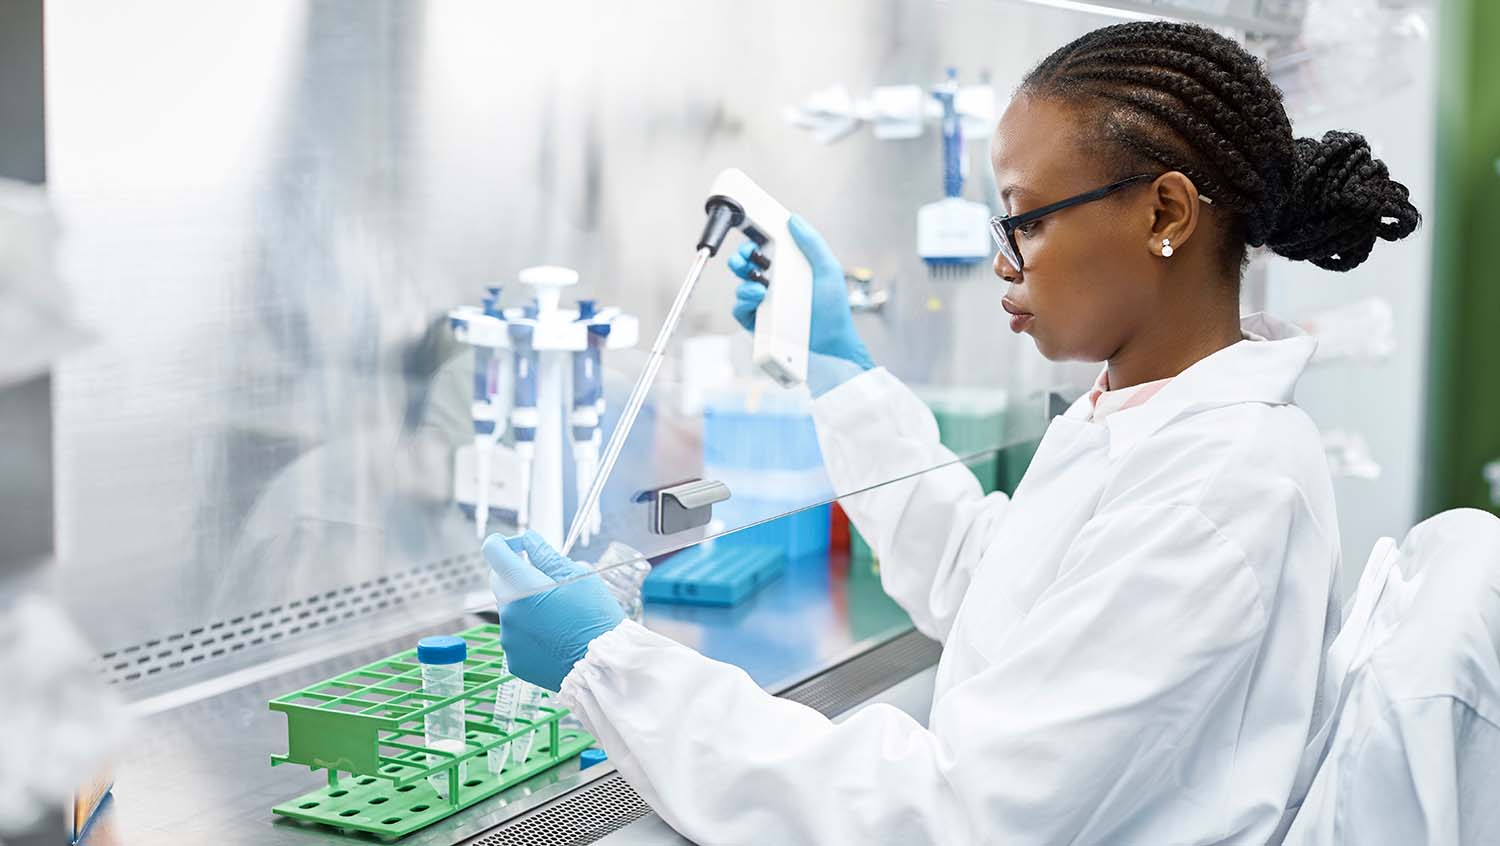 Female scientist analyzing HIV medical sample in test tube